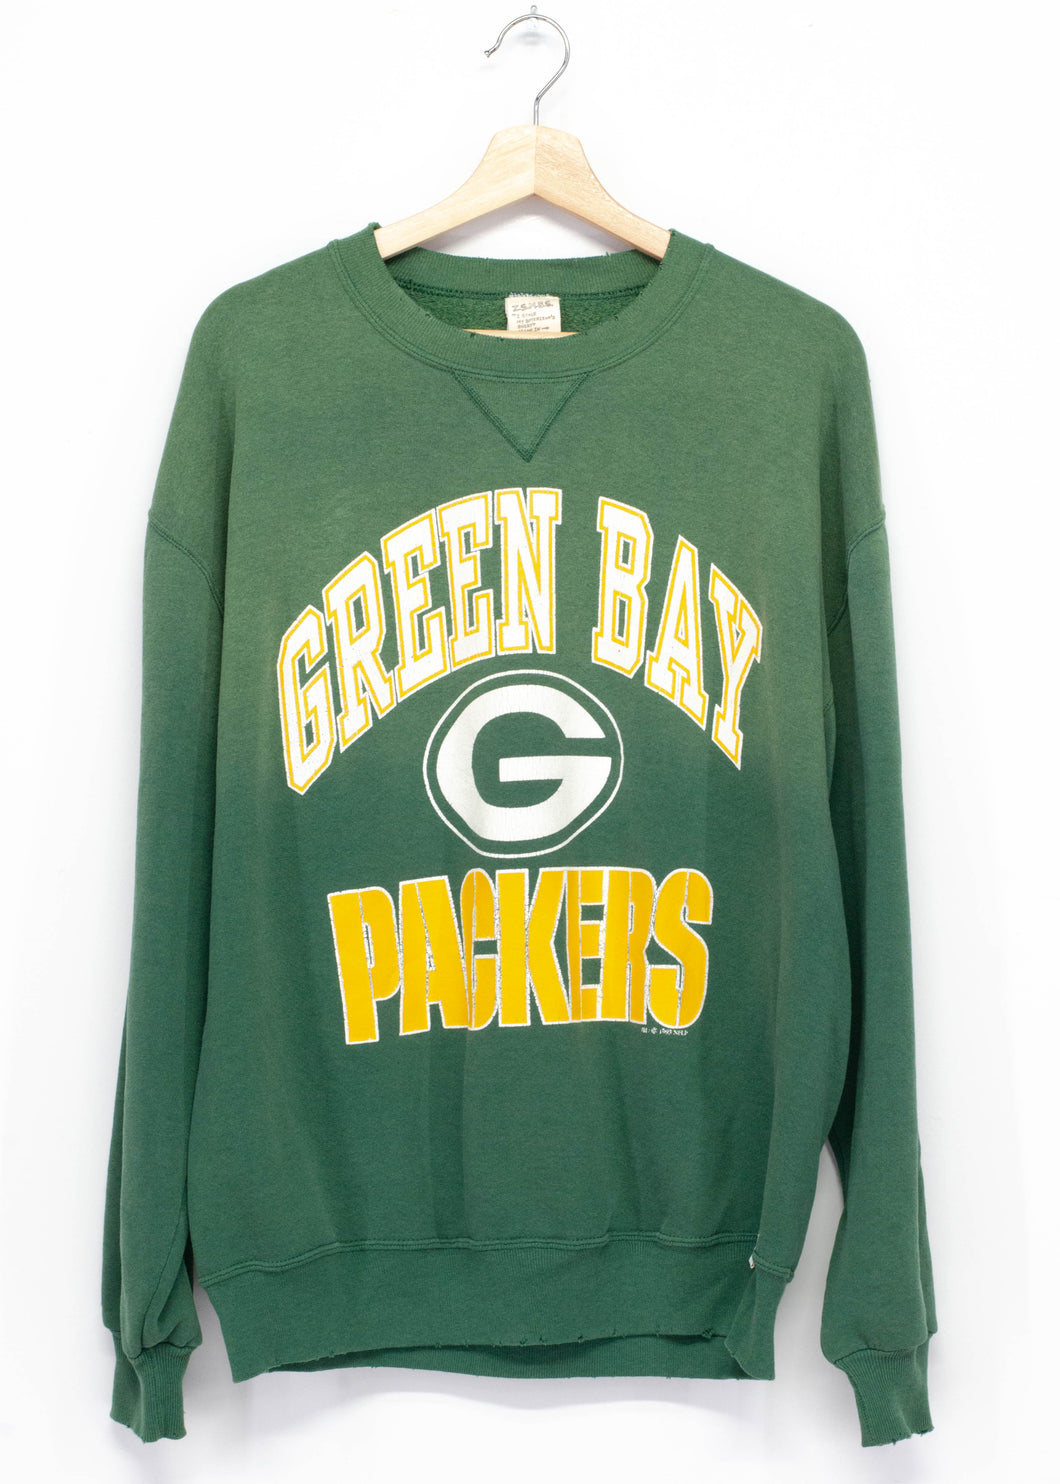 green bay packers vintage sweater